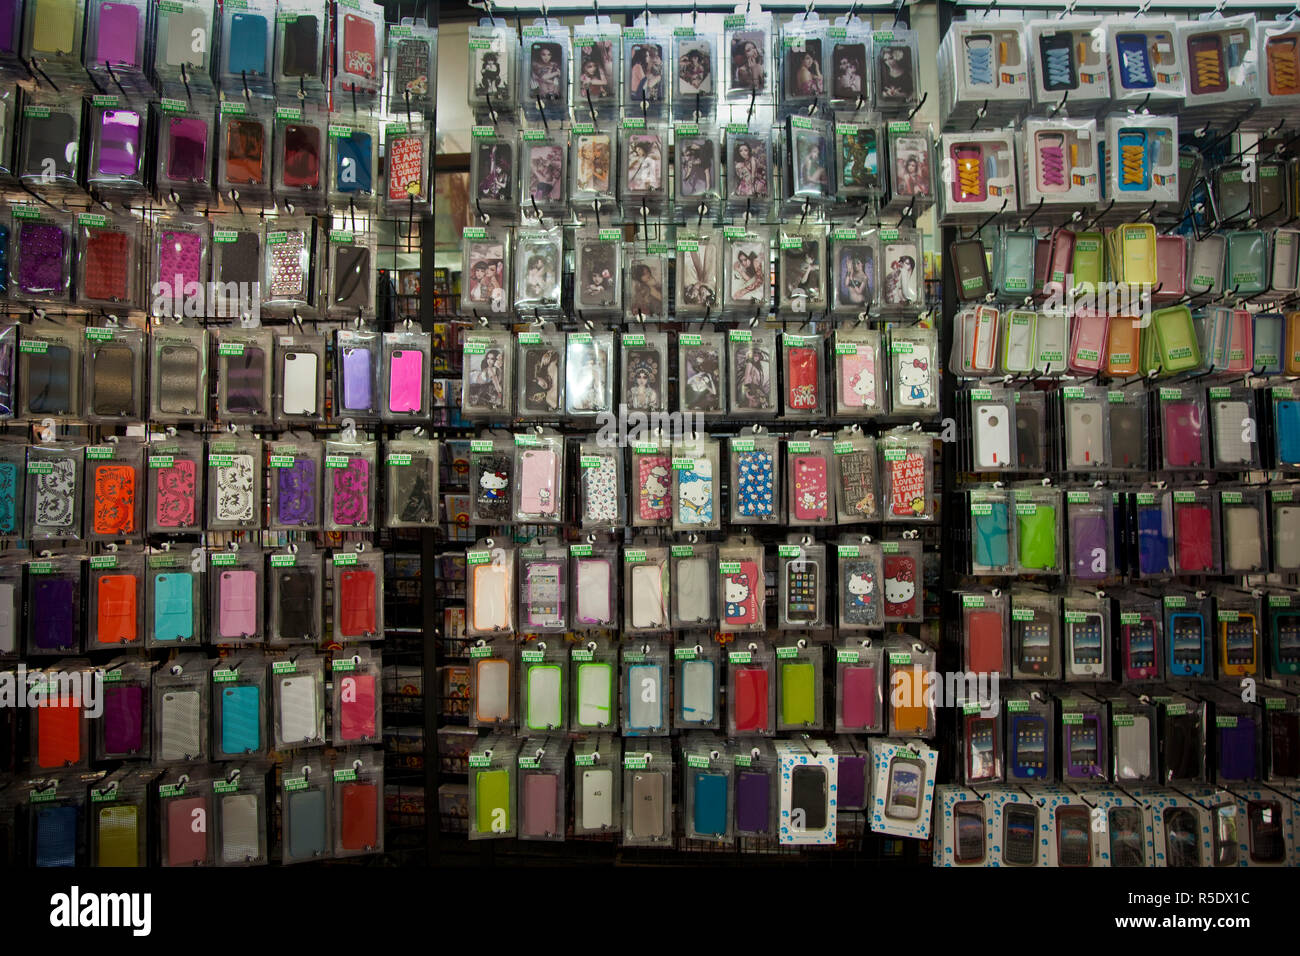 Shop selling mobile phone covers, Singapore Stock Photo - Alamy